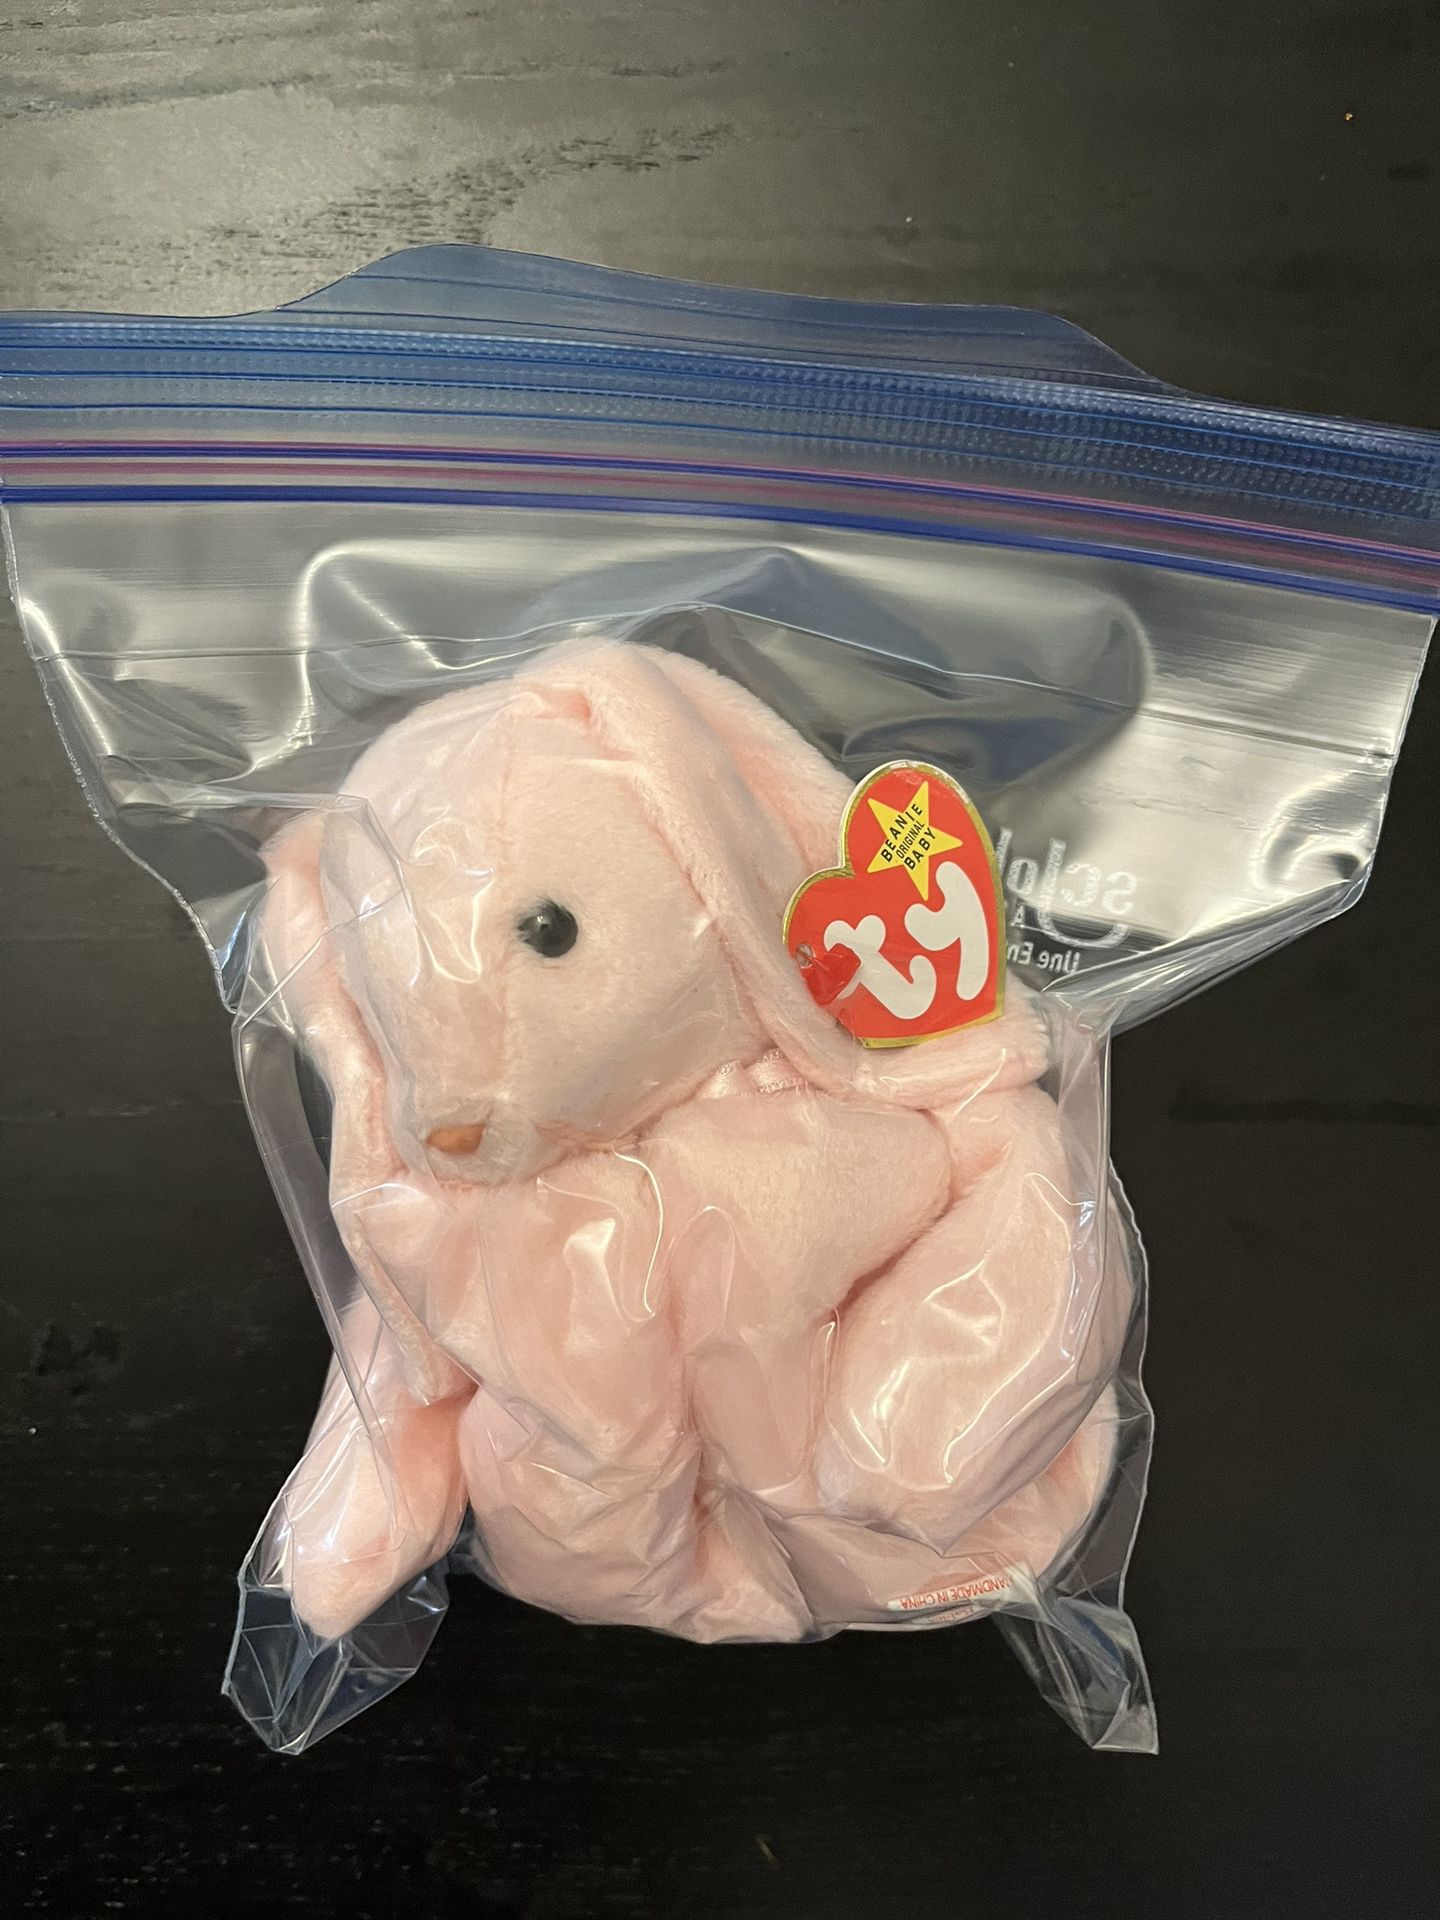 Original Beanie Babies, And Excellent Condition With Tags And With All The Errors